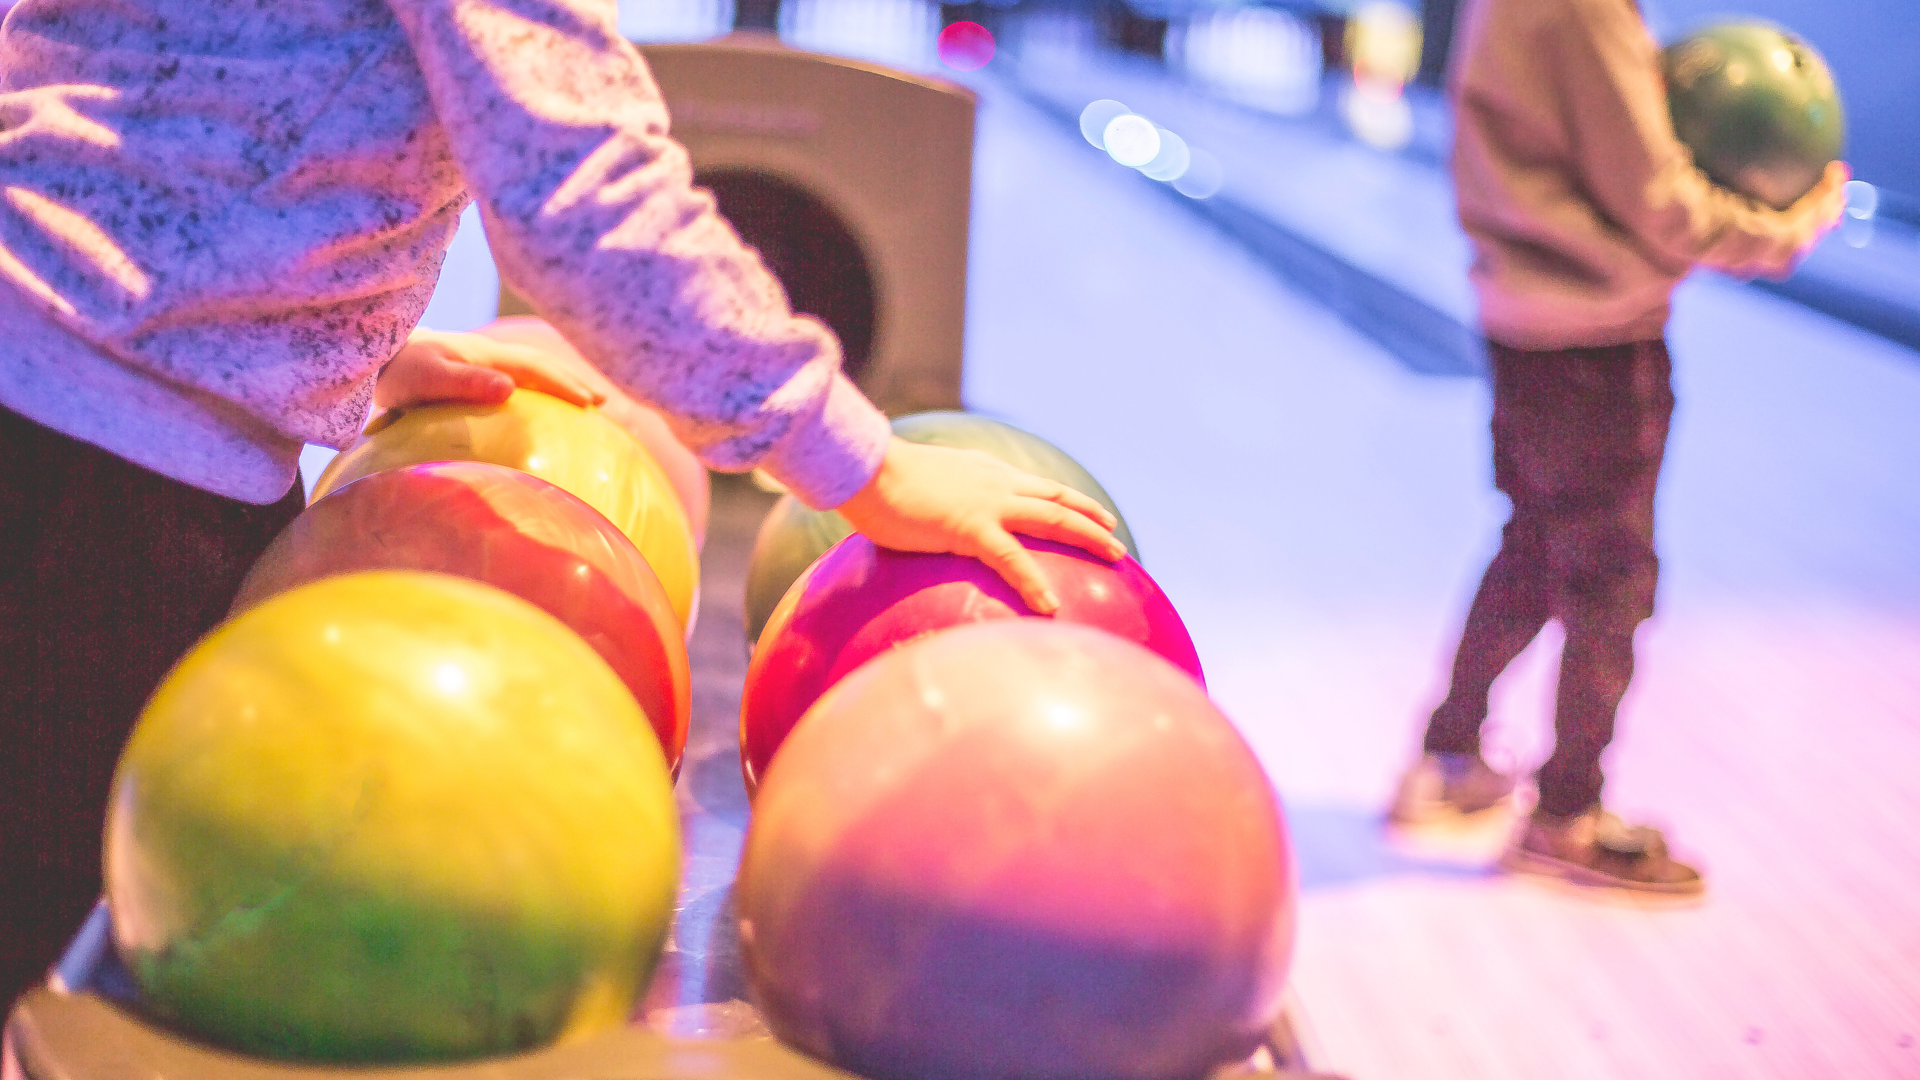 Attractions - Glow bowling